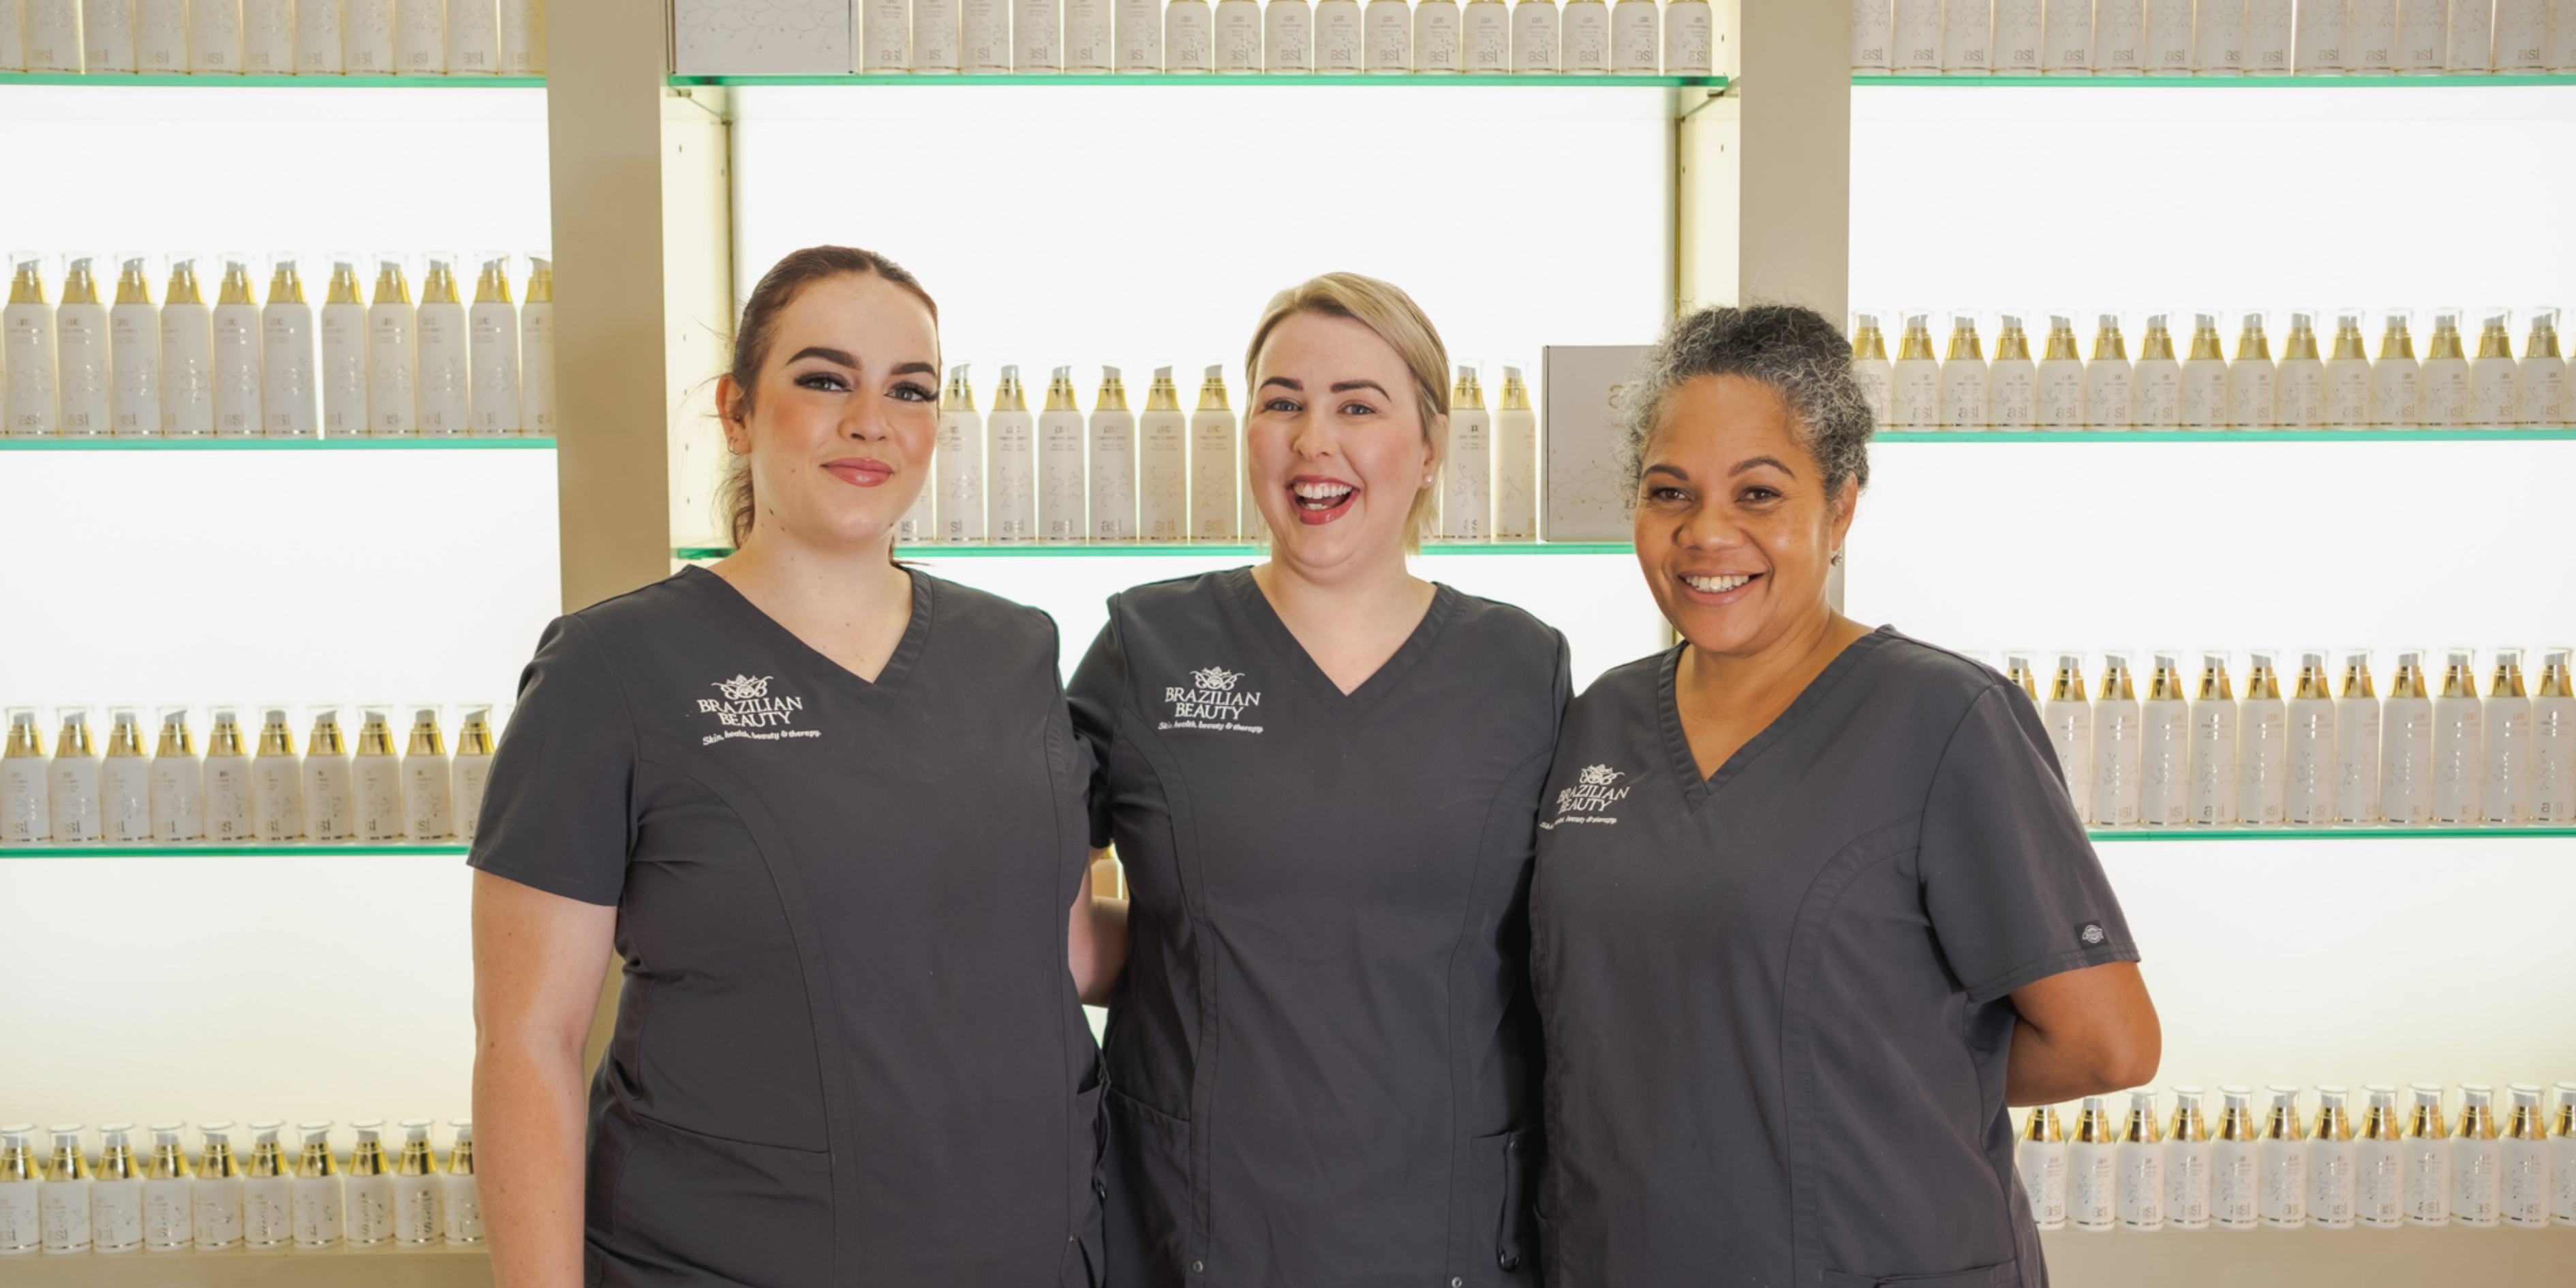 3 women working at Brazilian Beauty smiling together - lash experts